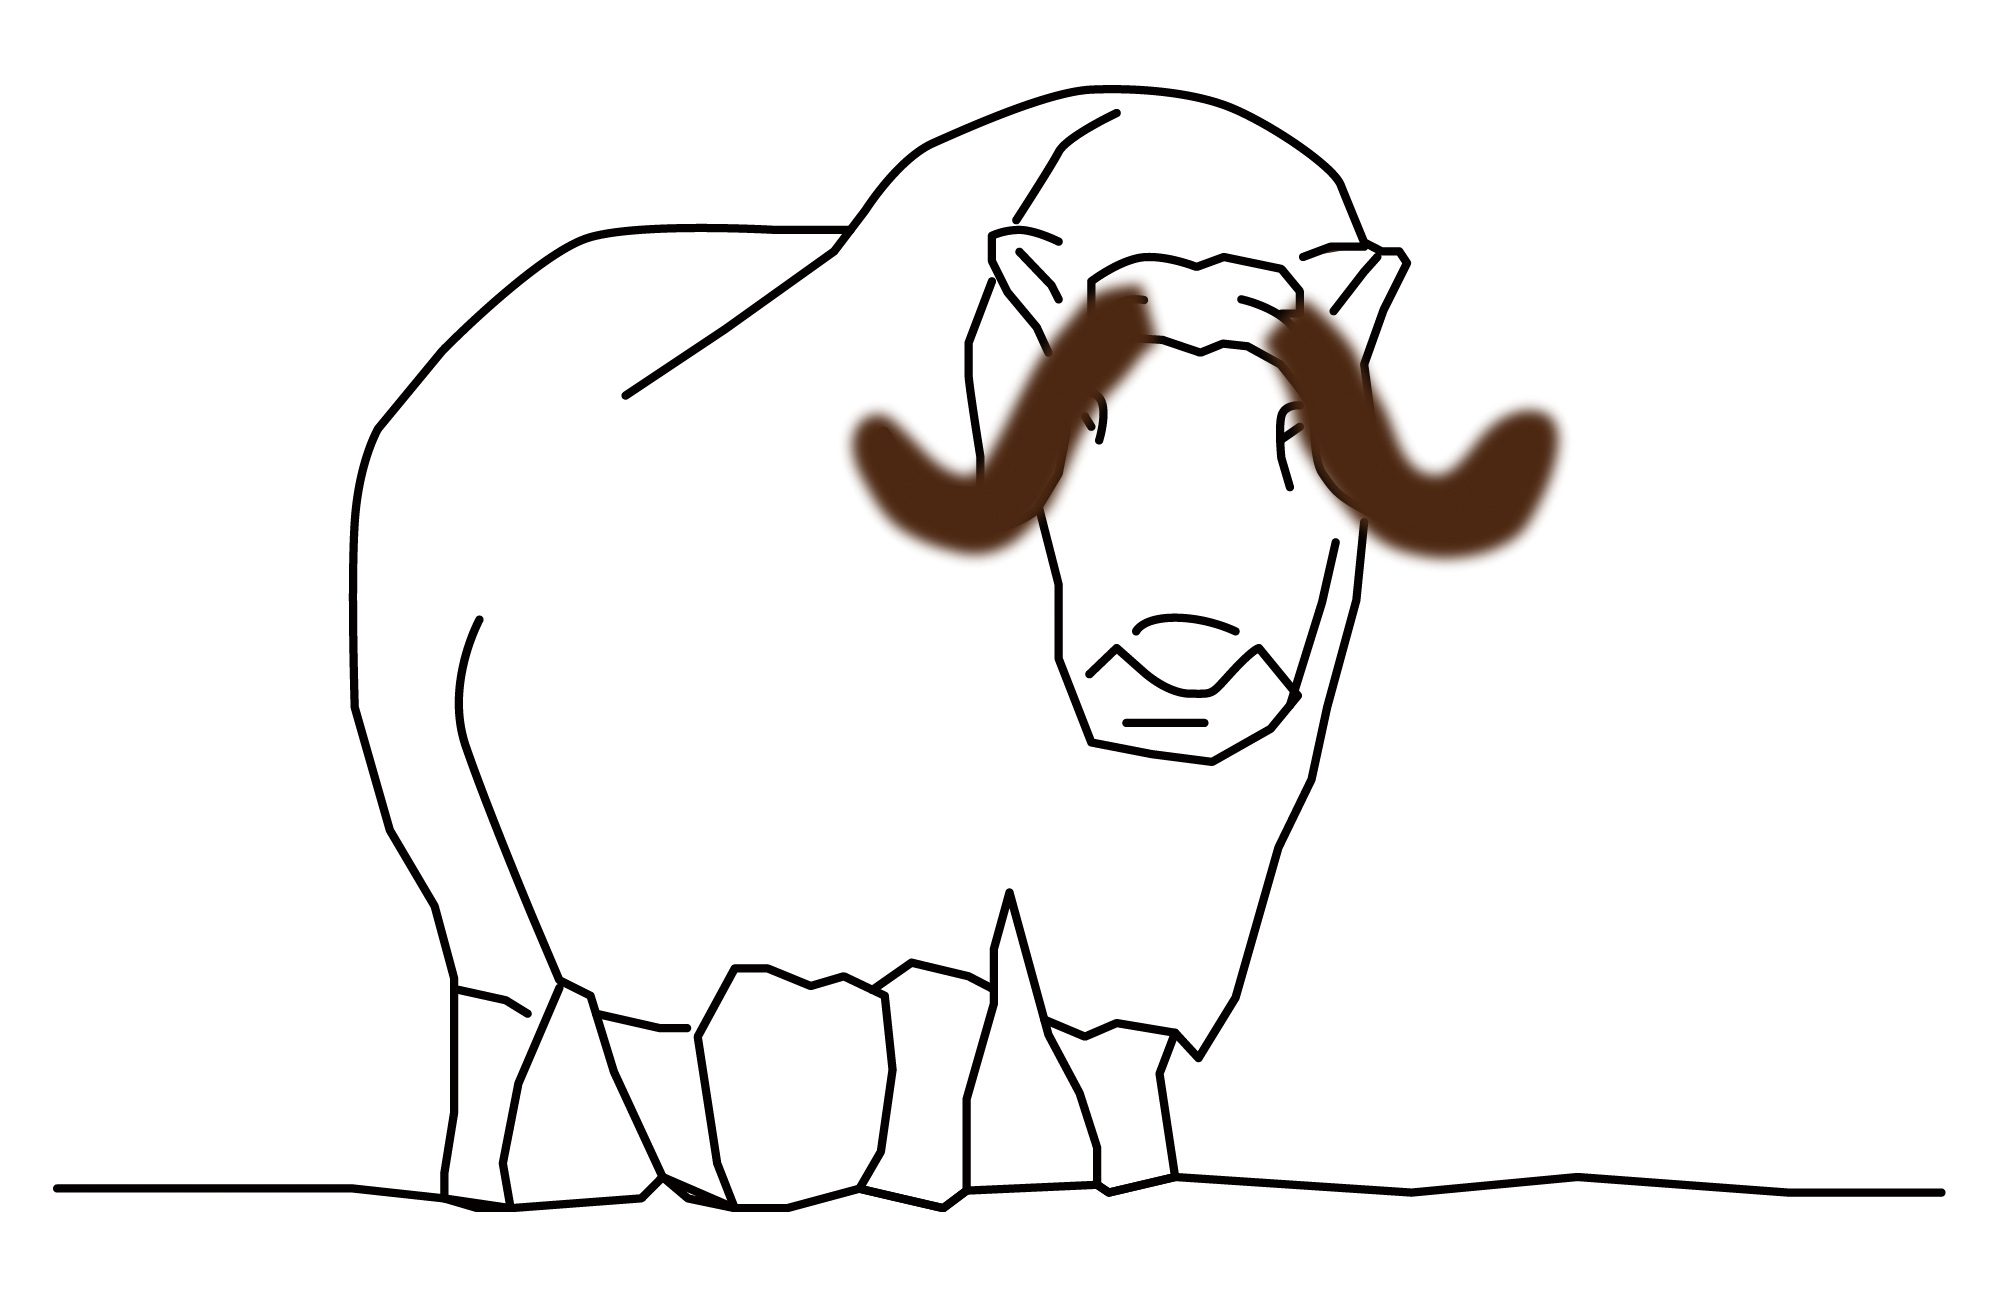 Image：<p>Drawing for 'Kitting horn cover for a muskox', 2020</p>
